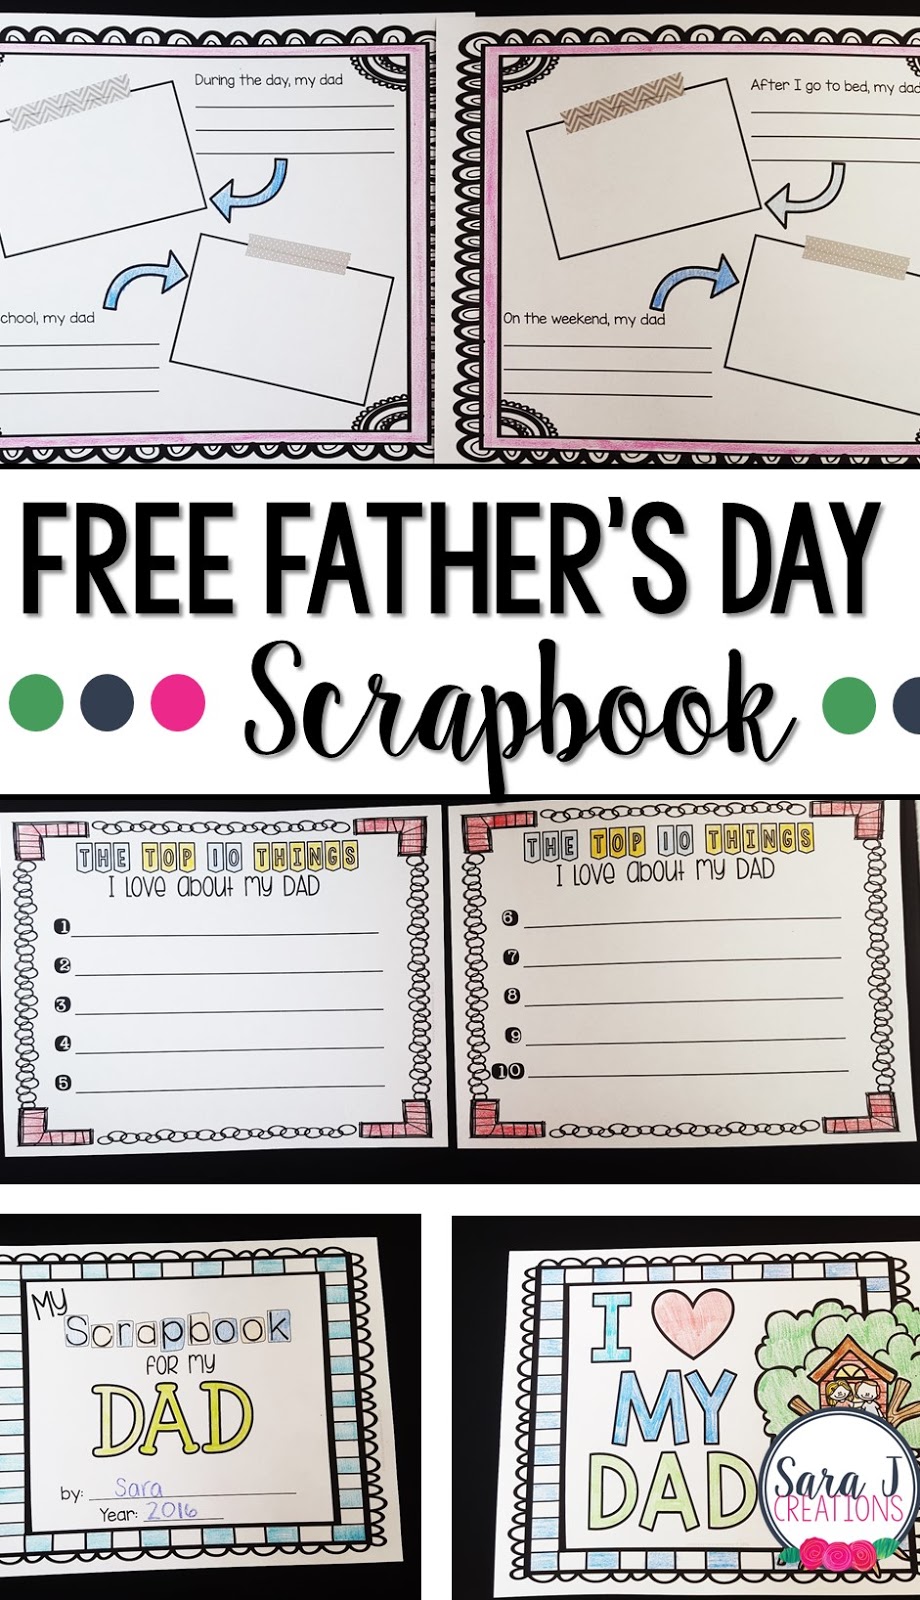 Free Father's Day printable scrapbook!  A cute way for children to show their dad how much they love him and how they view him from their perspective.